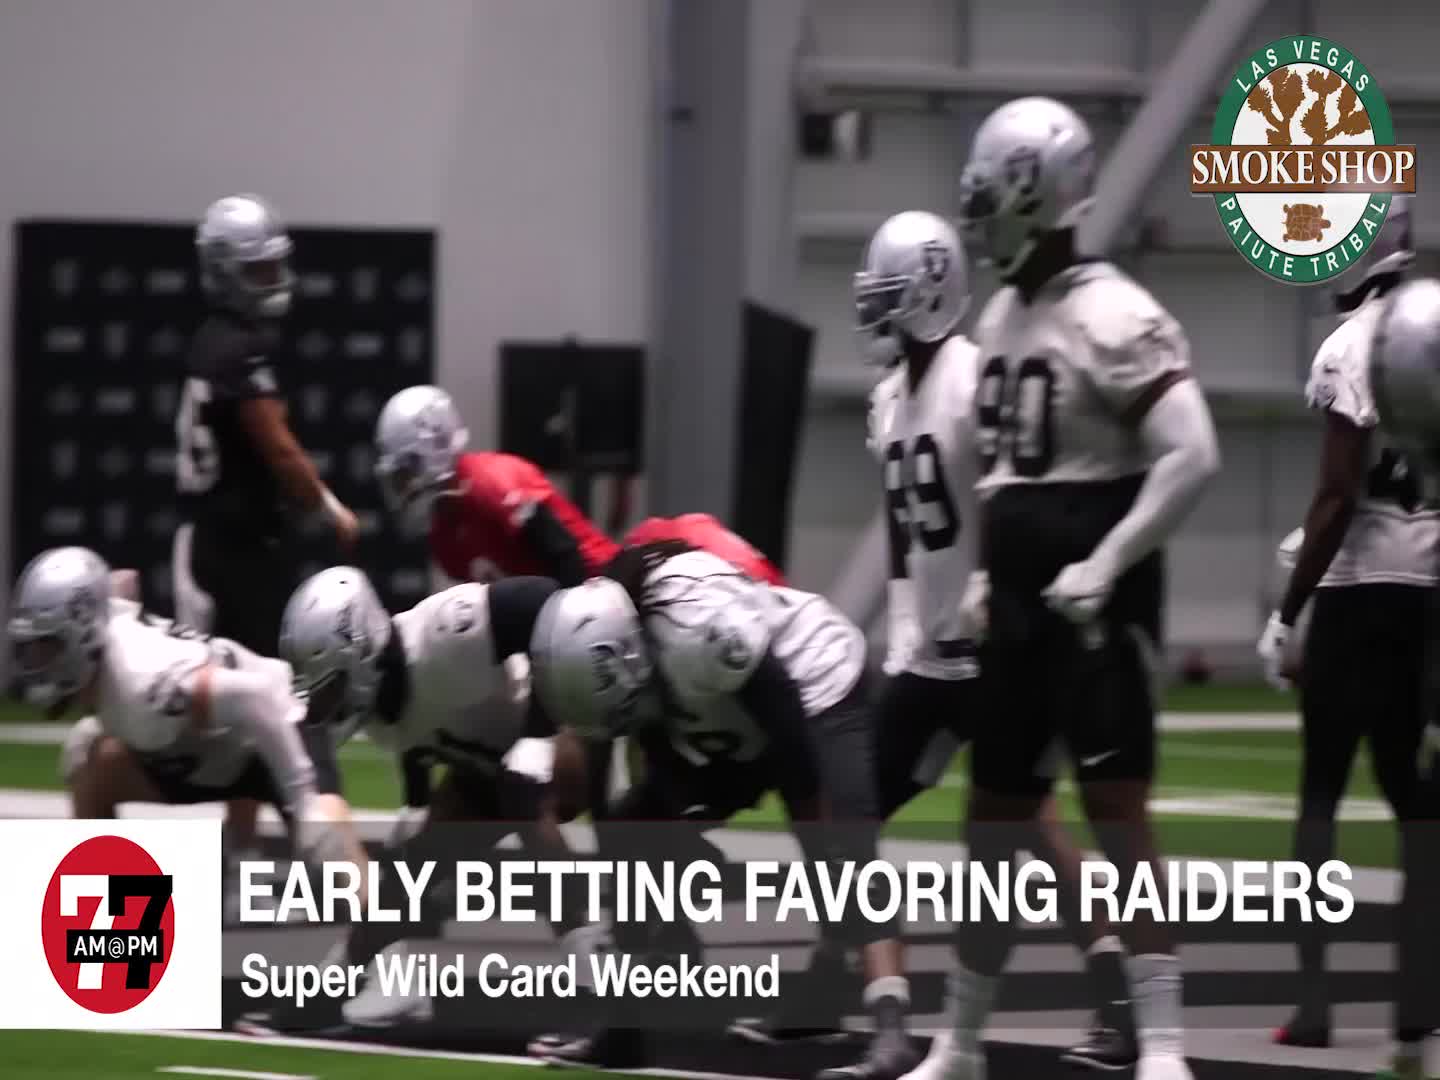 7@7PM Early Betting Favoring Raiders